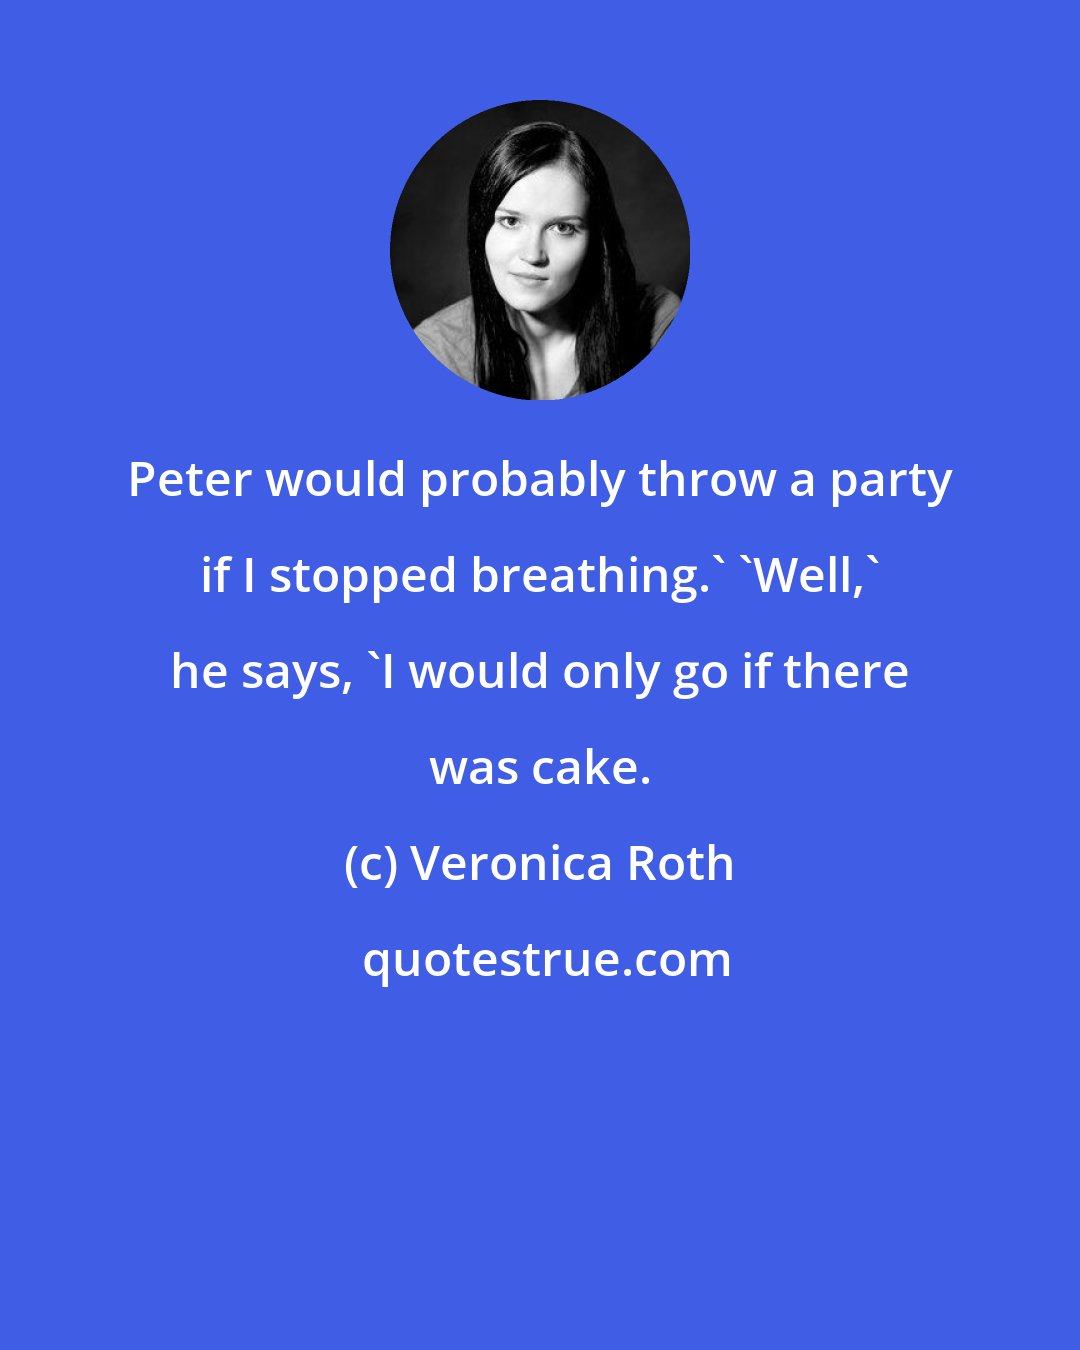 Veronica Roth: Peter would probably throw a party if I stopped breathing.' 'Well,' he says, 'I would only go if there was cake.